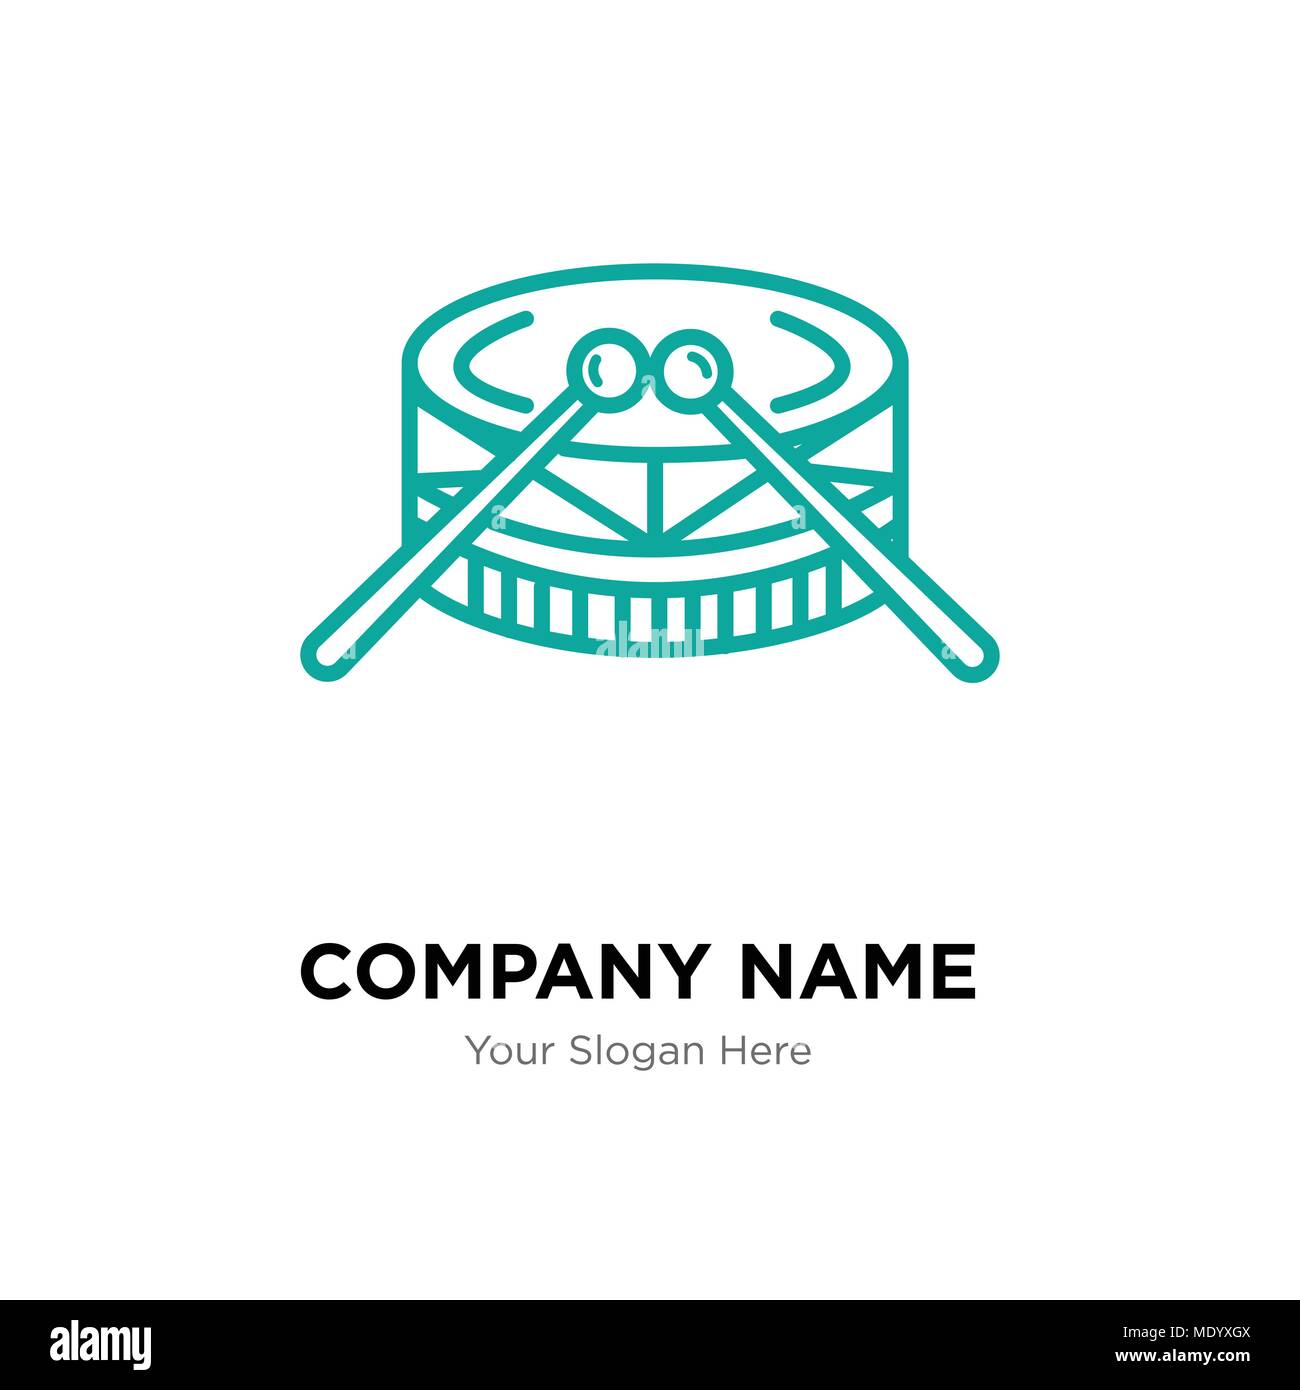 Drums company logo design template, Business corporate vector icon Stock Vector